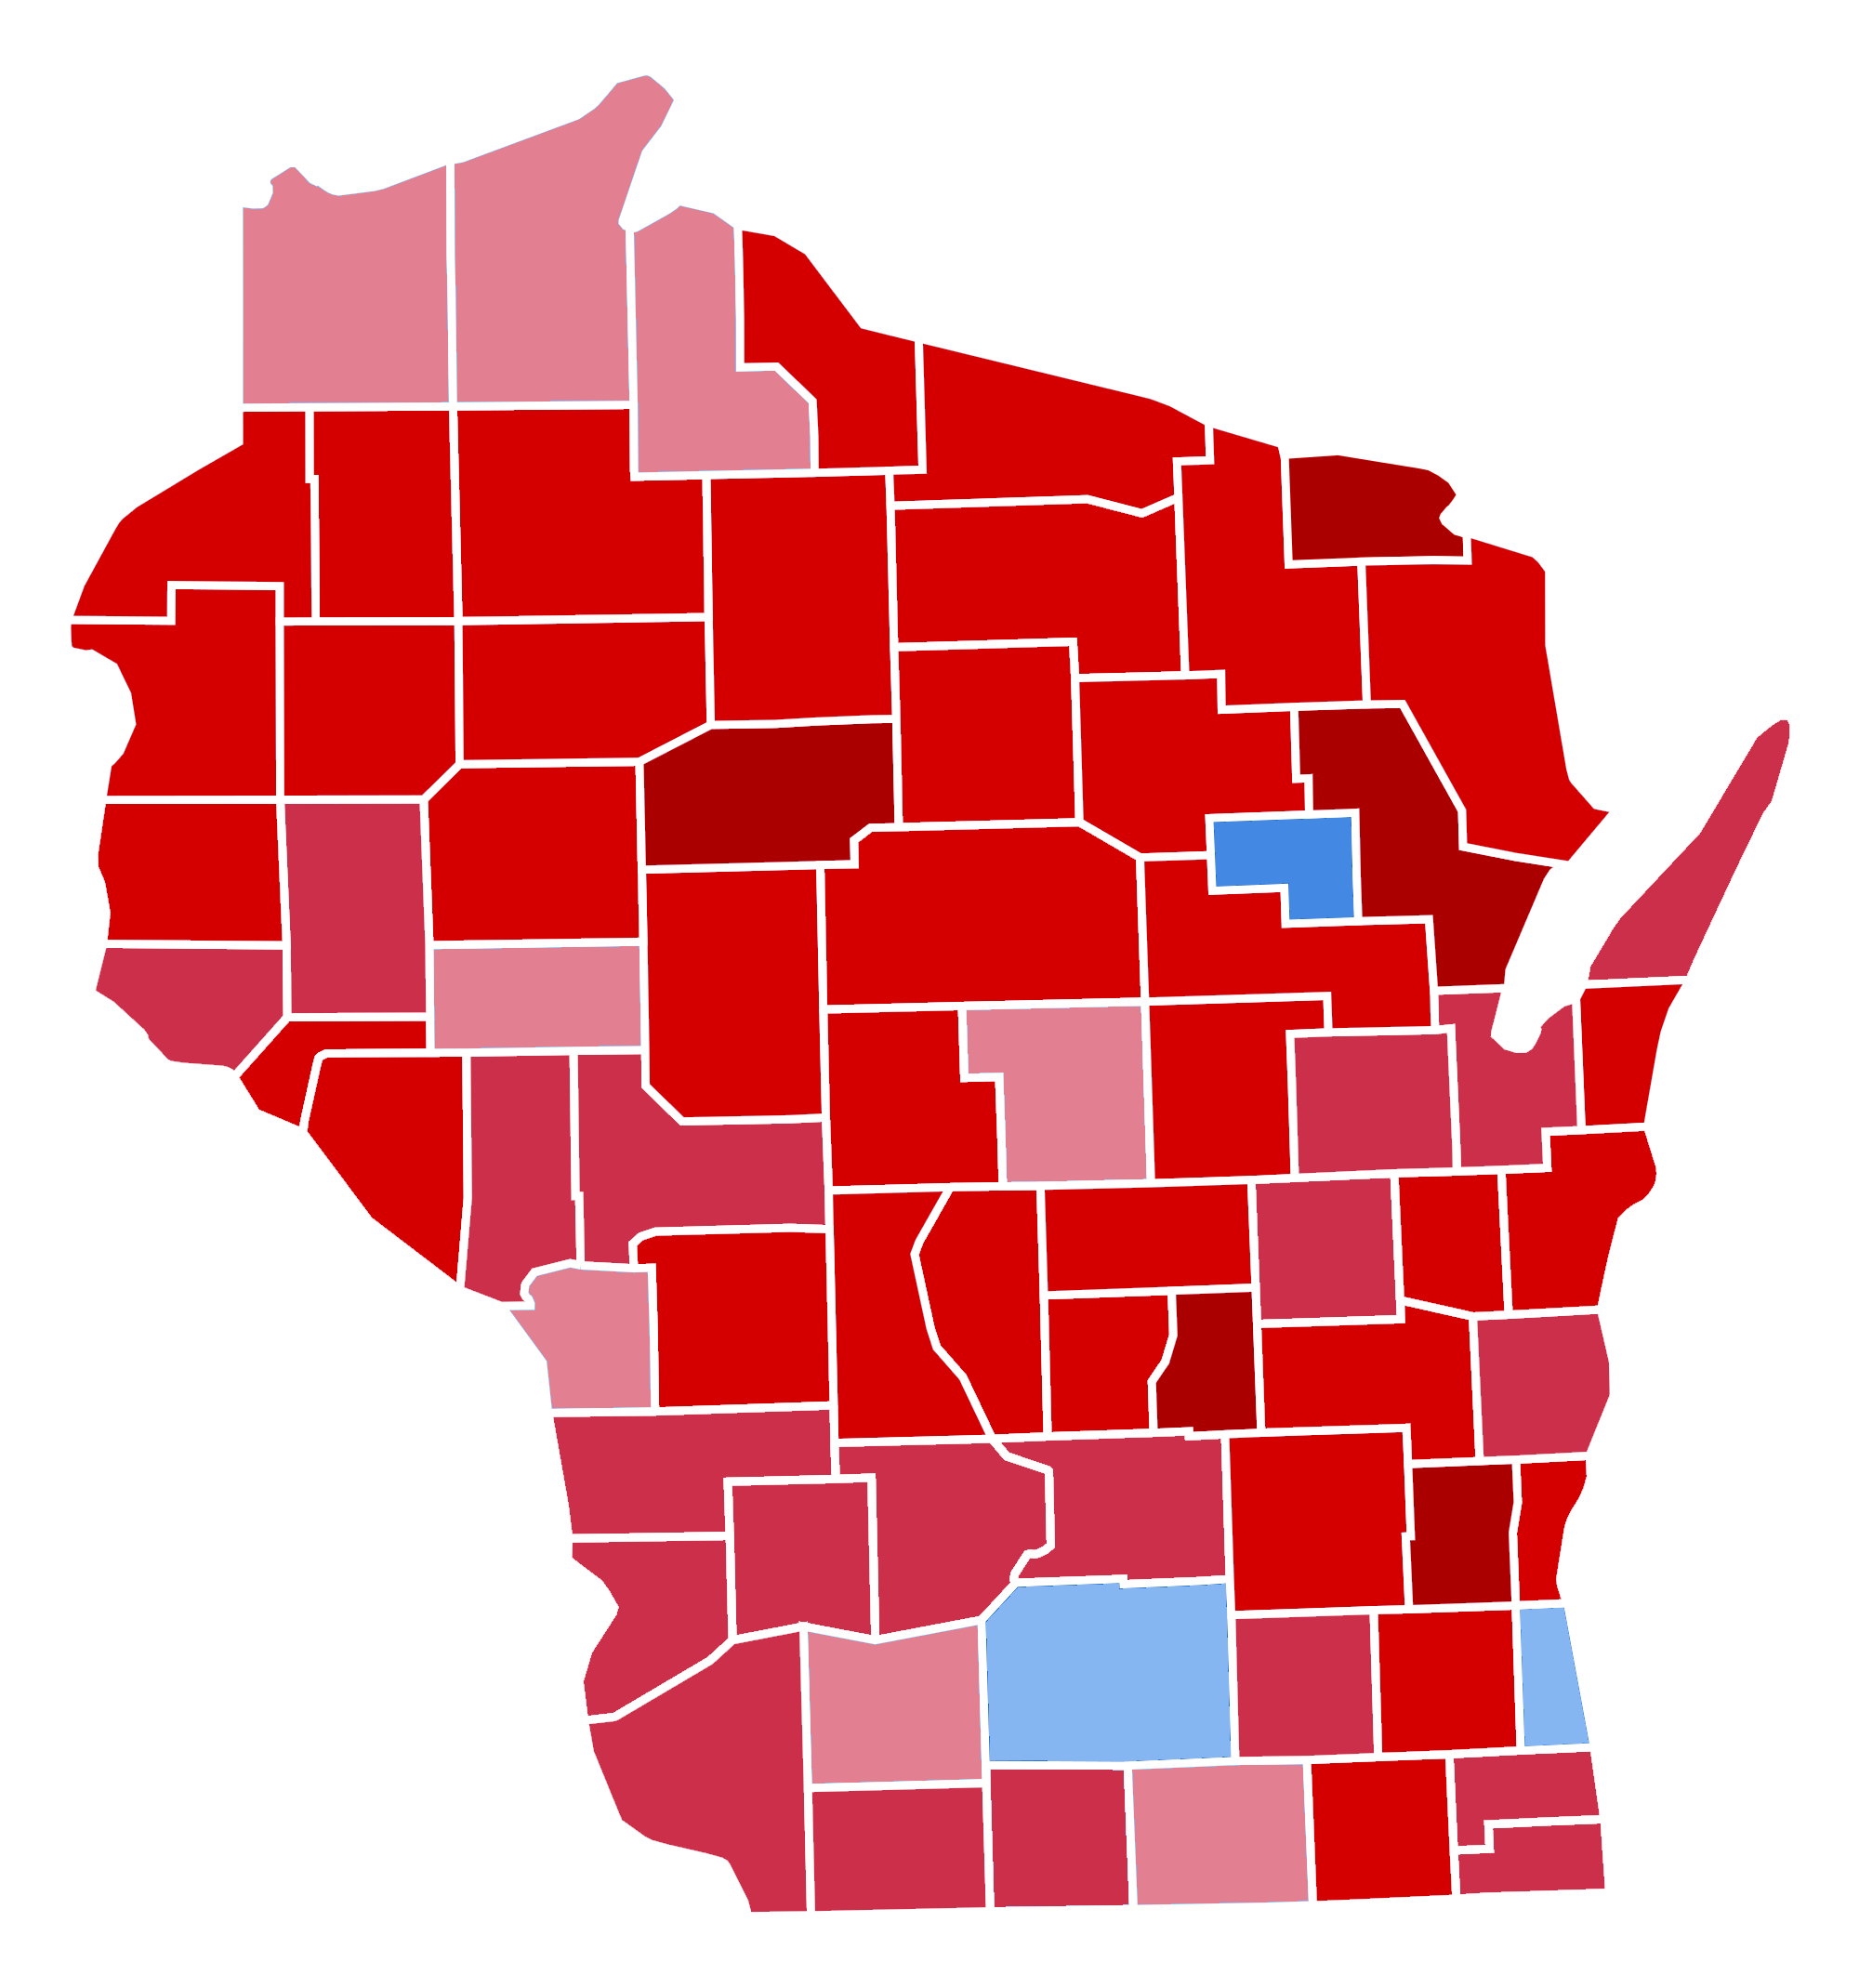 Wisconsin_Presidential_Election_Results_2016_Republican_Landslide_15.06%.png